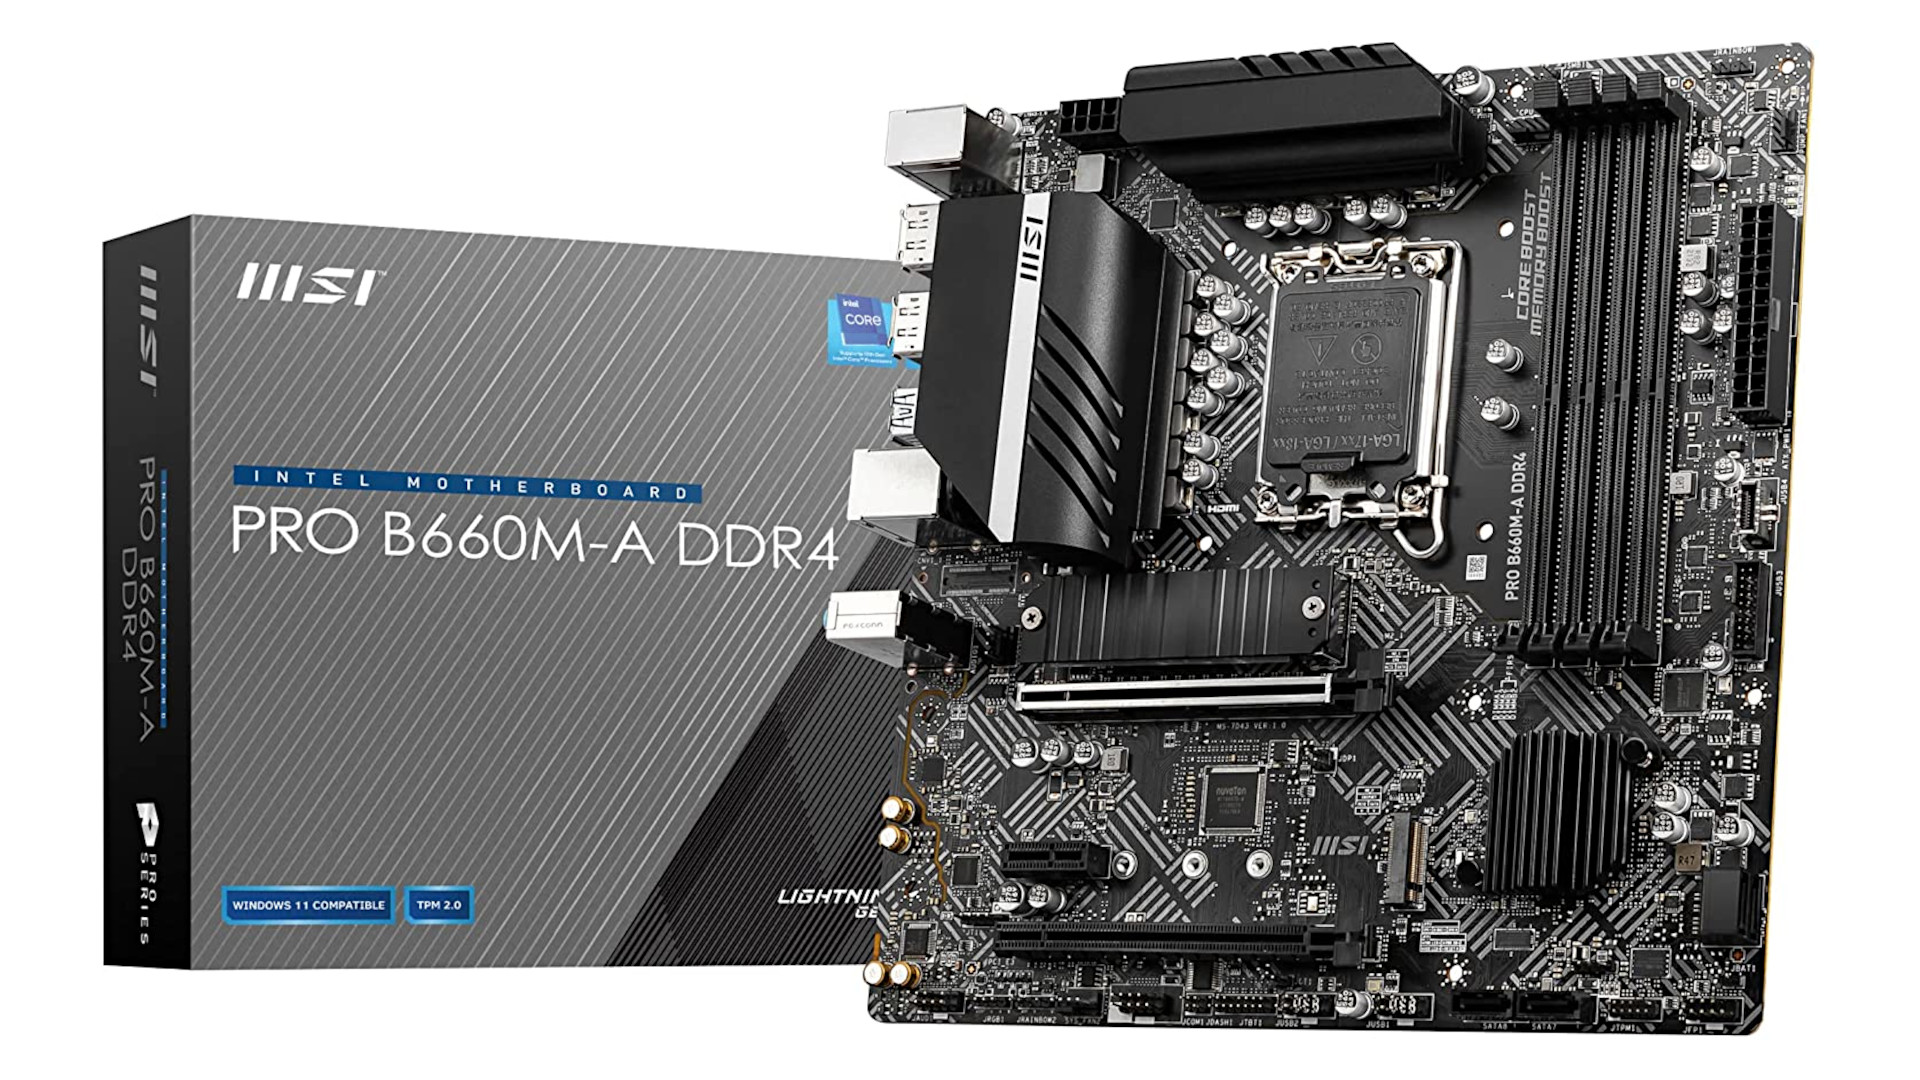 The best budget motherboard for Intel is the MSI Pro B660M-A